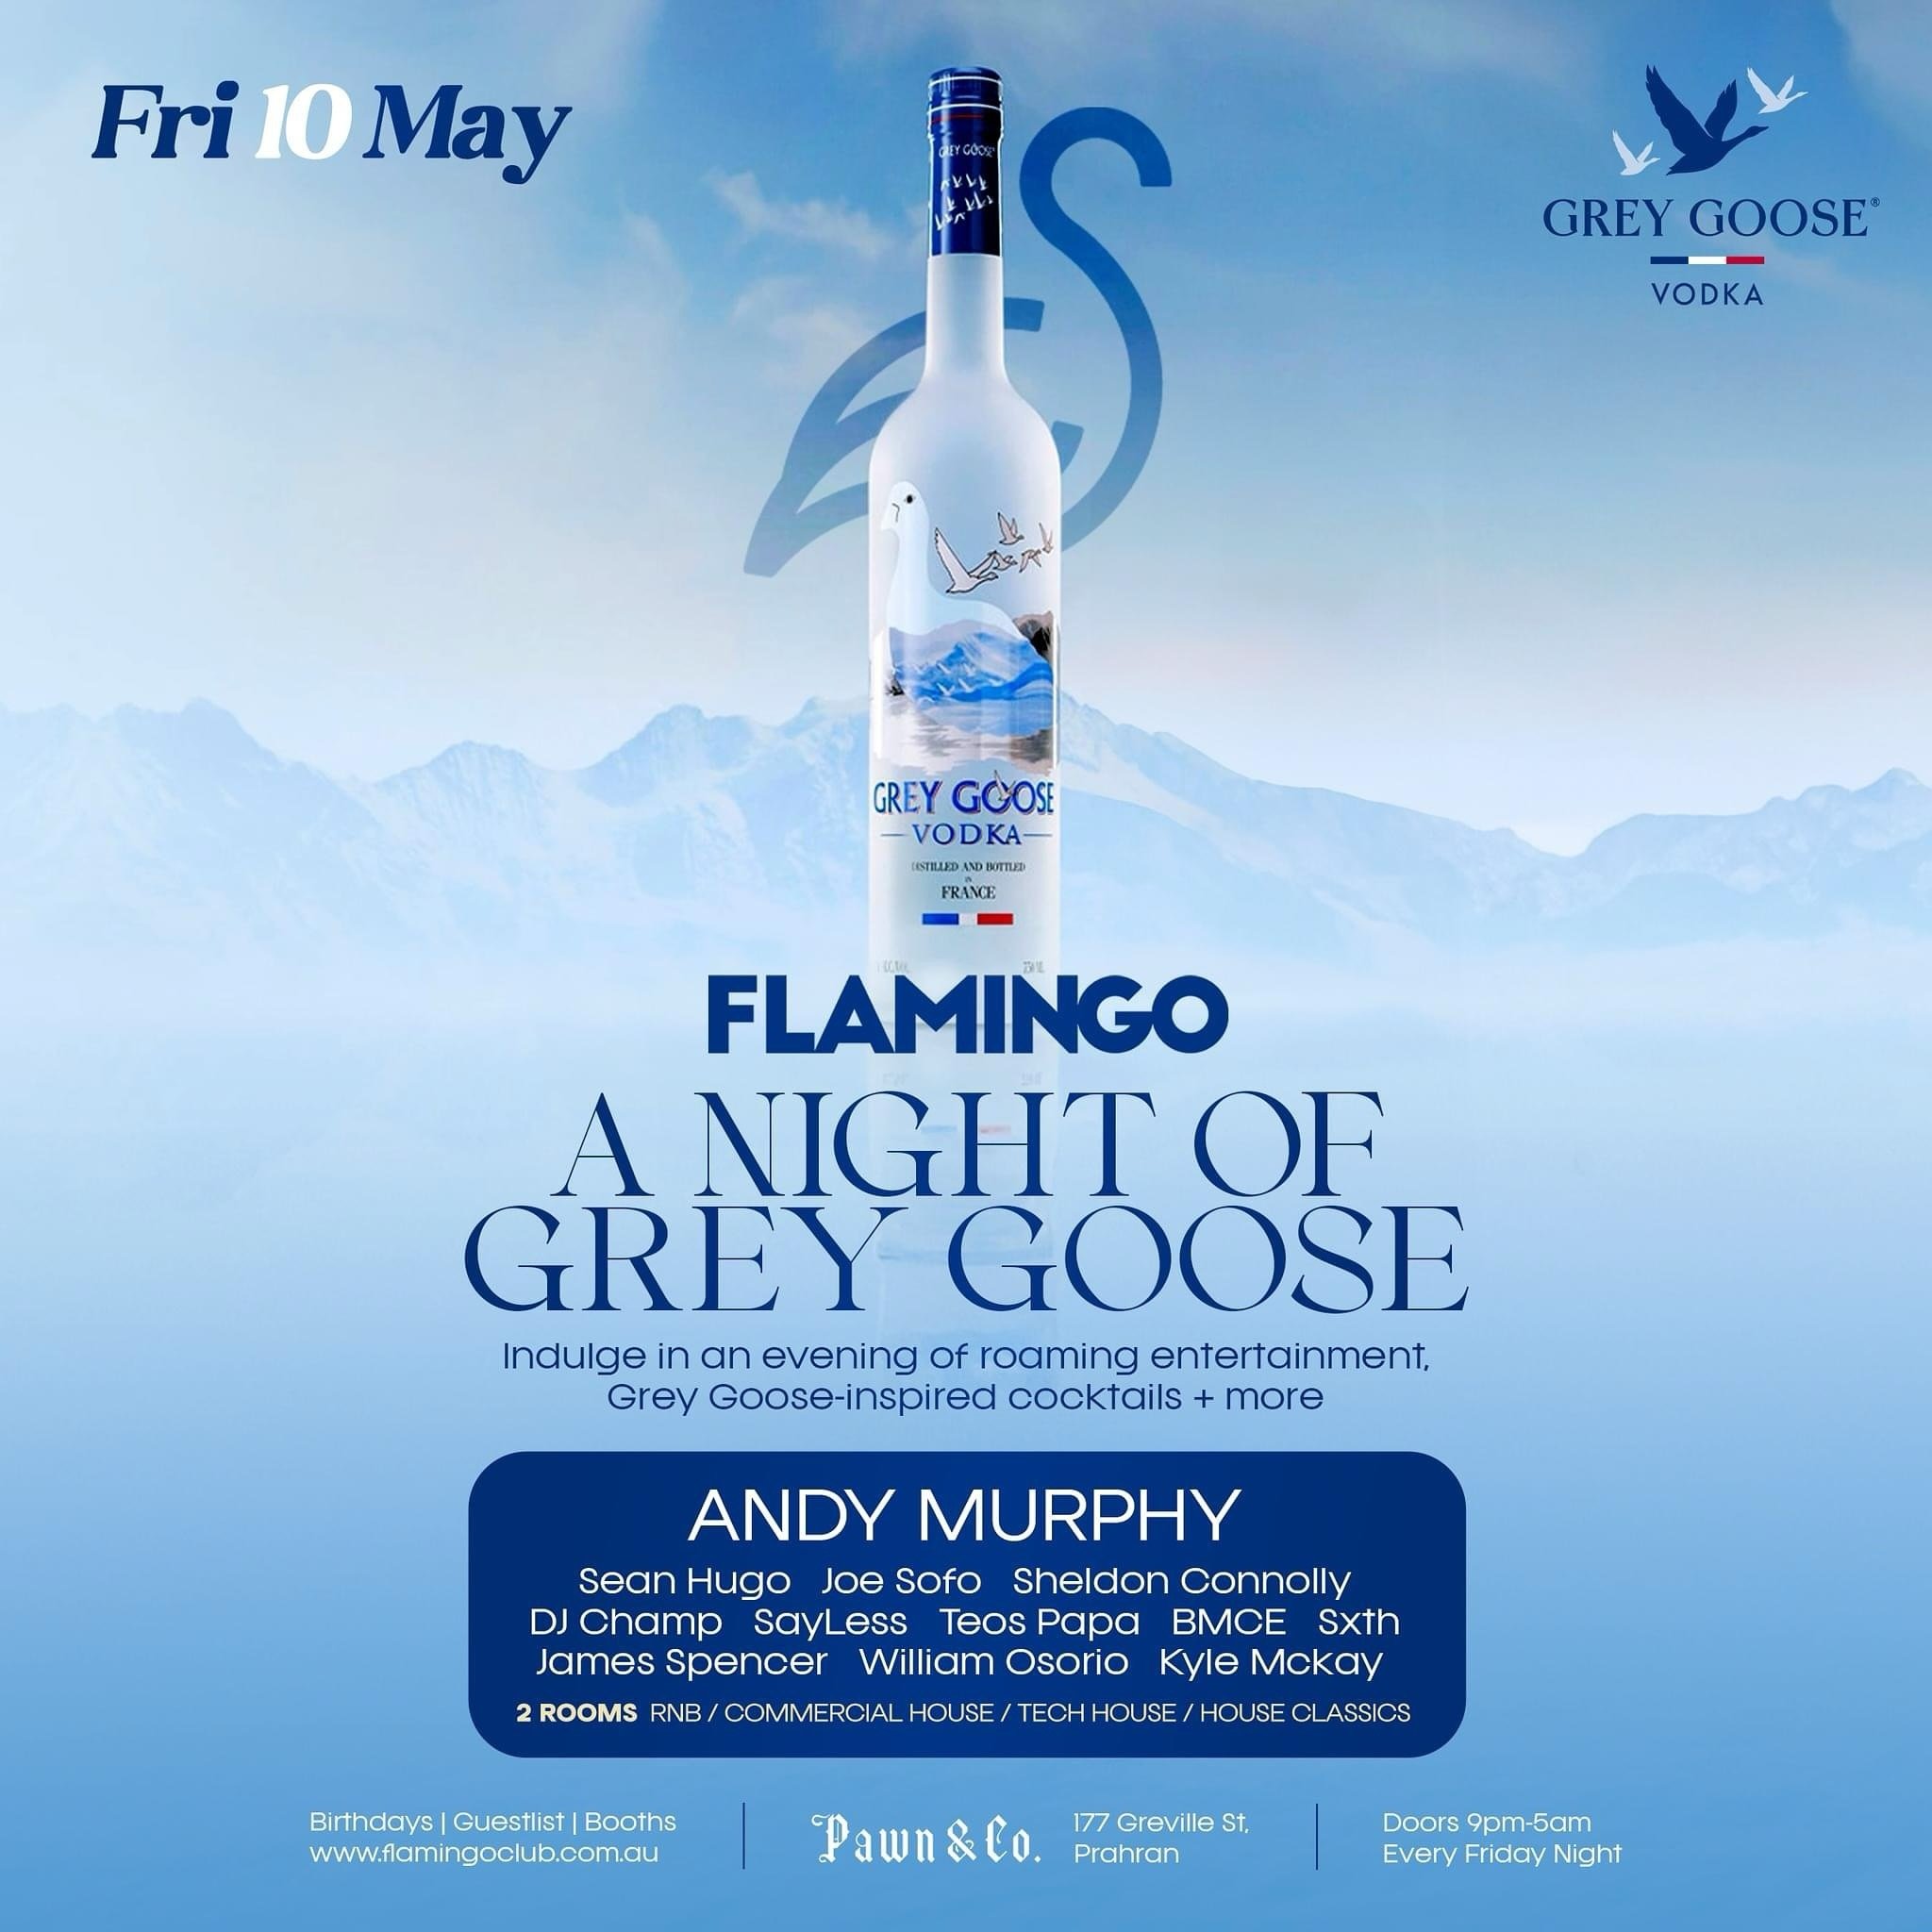 This Friday, Flamingo &amp; Grey Goose are excited to bring you: A NIGHT OF GREY GOOSE! 🍸🔥
Indulge yourself in an evening of roaming entertainment, Grey Goose-inspired cocktails, and more surprises! 

Feat Andy Murphy + some of Melbourne&rsquo;s be